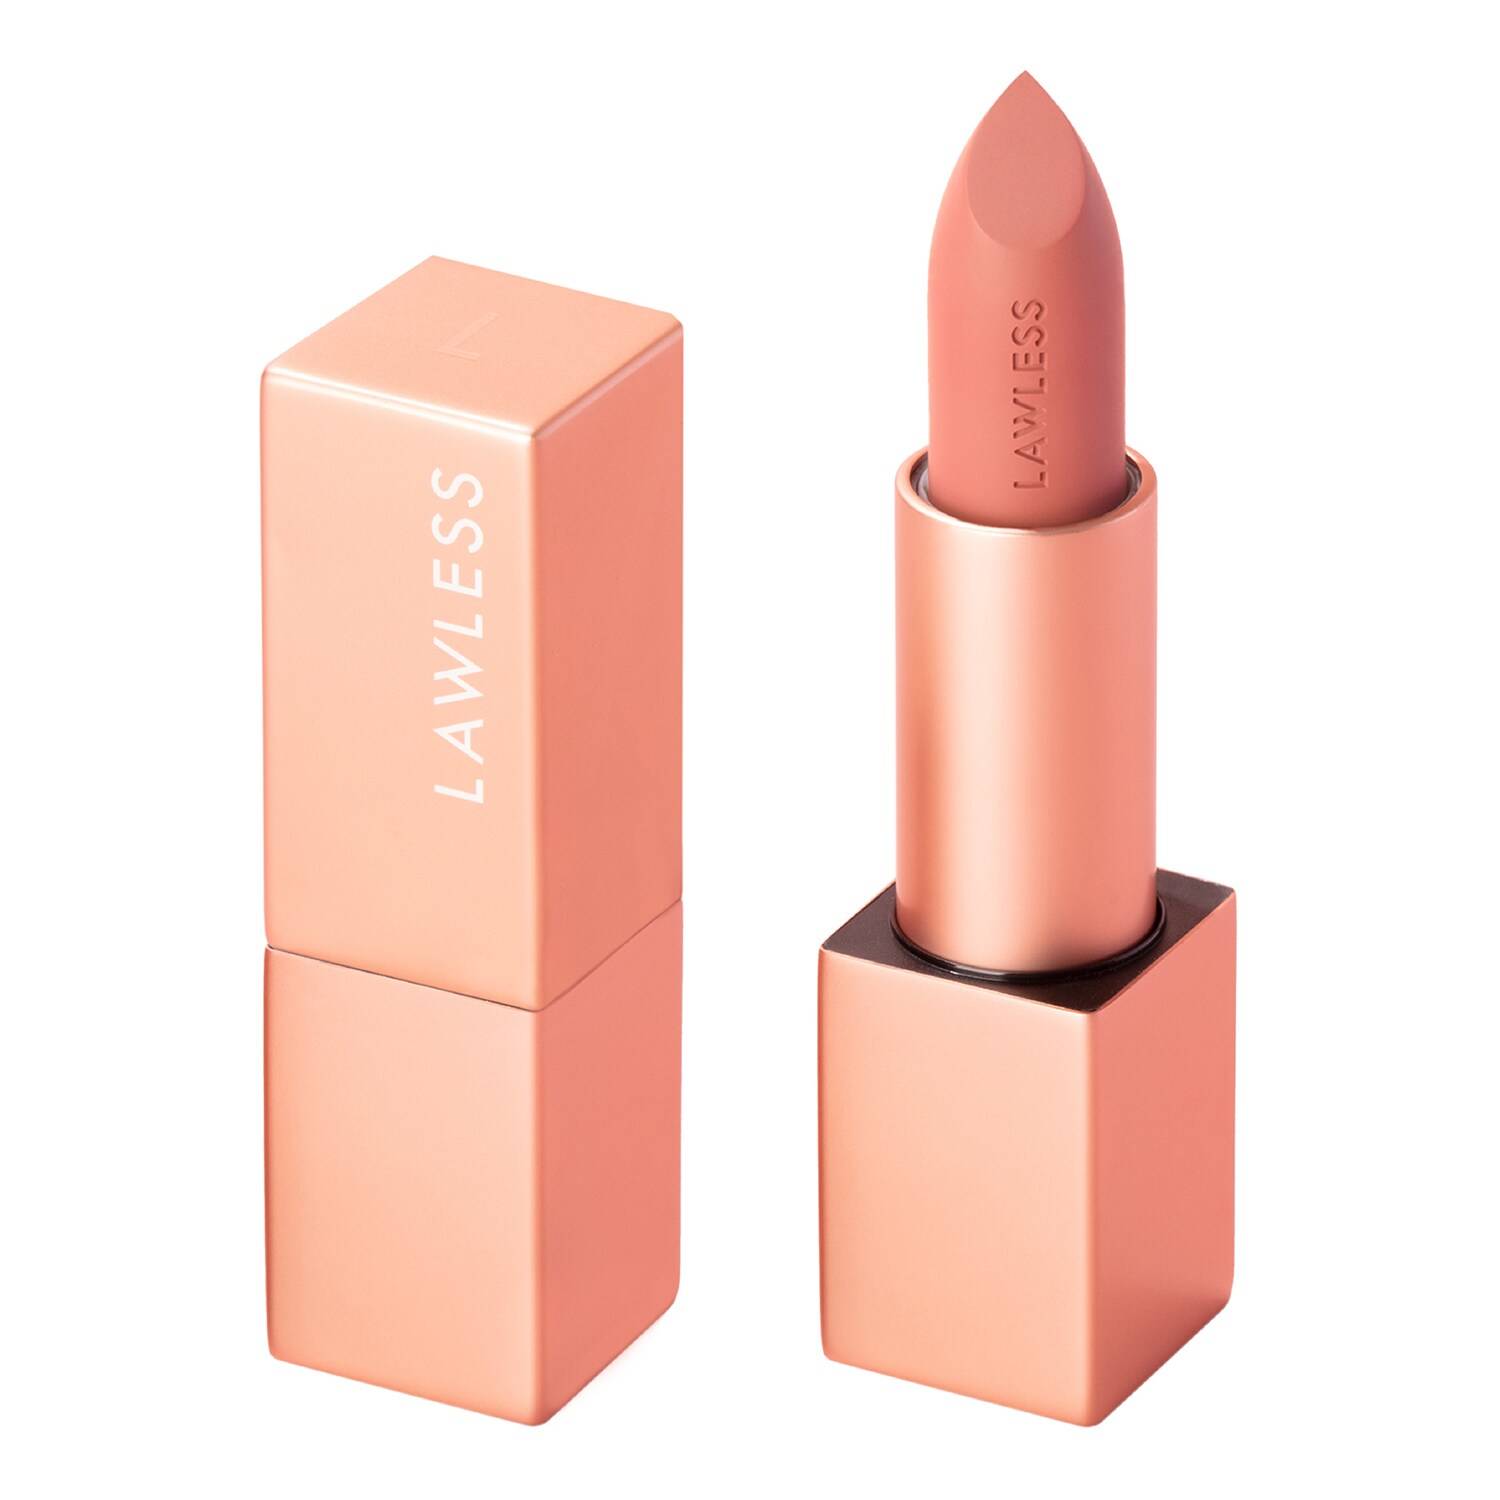 Lawless Beauty Forget The Filler Lip Plumping Line-Smoothing Satin Cream Lipstick 3.7G Tropic